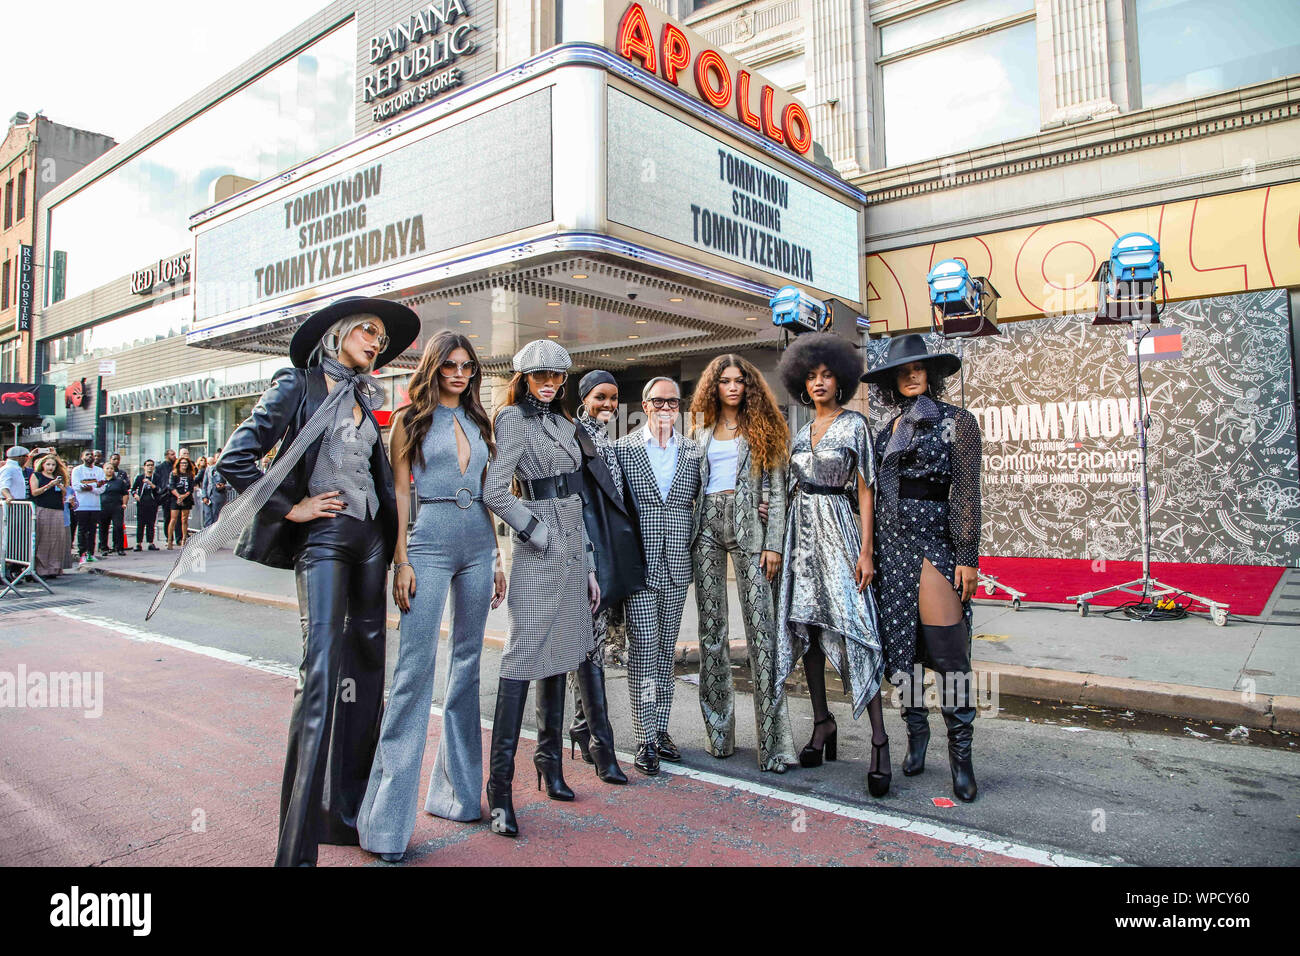 New York, New York, USA. 8th Sep, 2019. Model Winnie Harlow, Halima Aden,  Designer Tommy Hilfiger and Actress Zendaya during New York Fashion Week  fashion show at Apollo Theater in New York